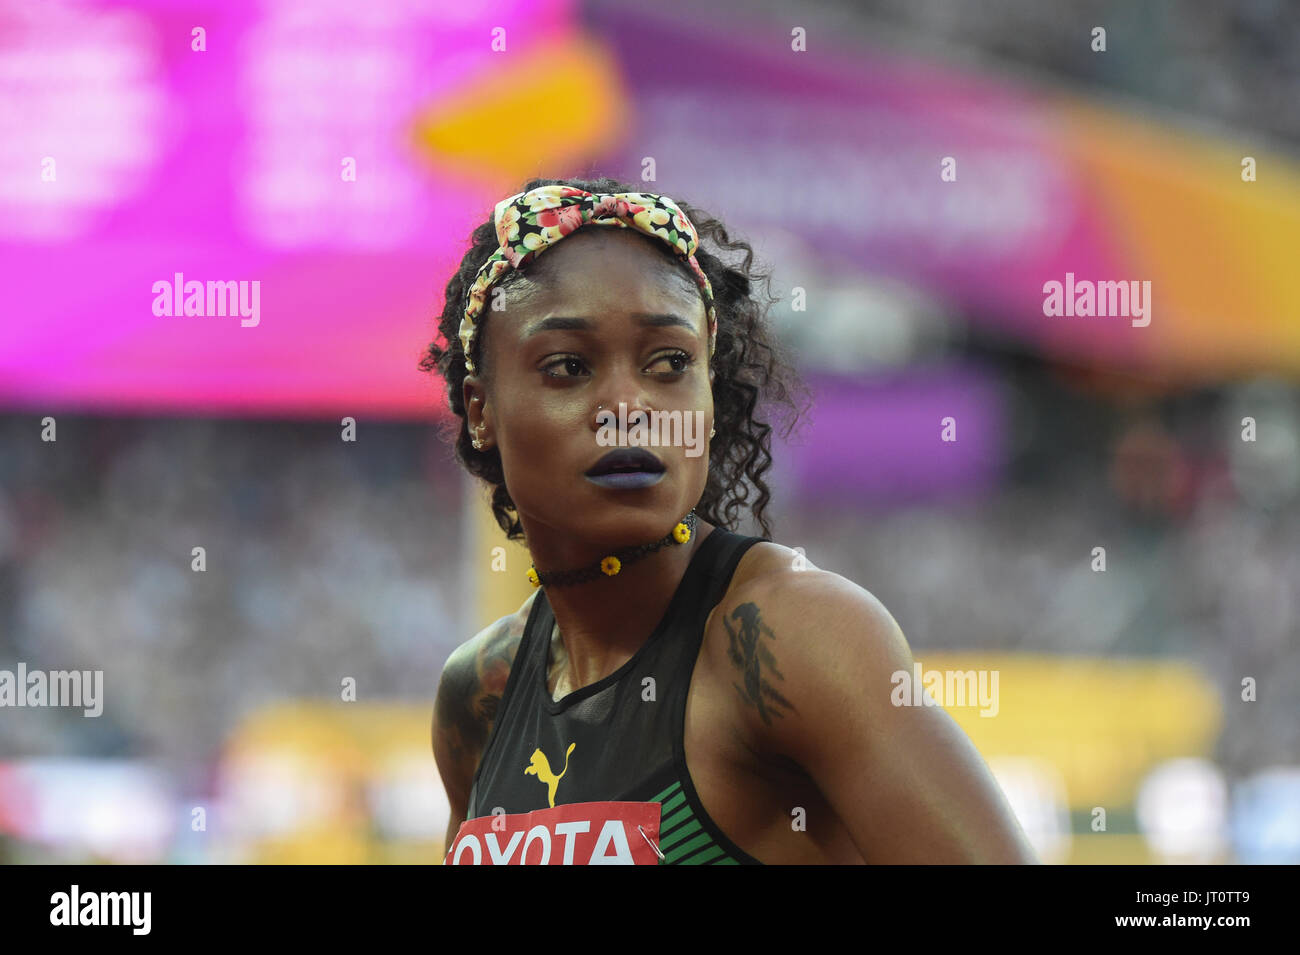 London, UK. 06th Aug, 2017. Elaine THOMPSON, Jamaica,after 100 meter semifinal in London on August 6, 2017 at the 2017 IAAF World Championships athletics. Credit: Ulrik Pedersen/Alamy Live News Stock Photo